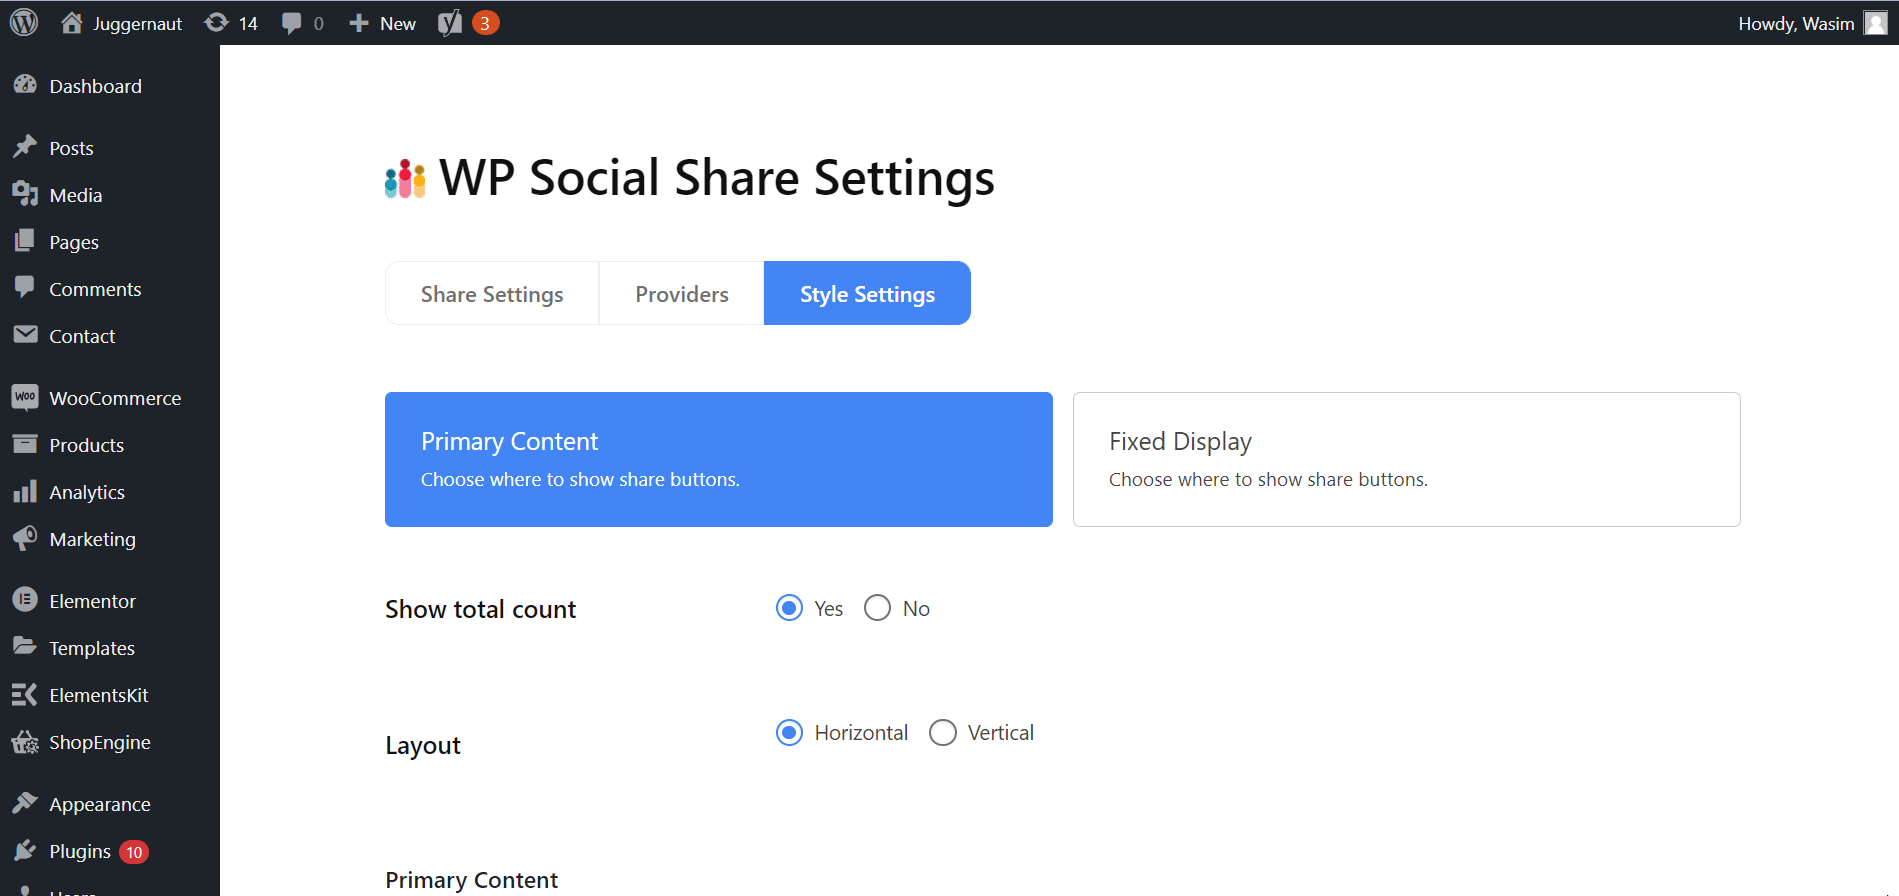 Switch to the Style Settings tab and view share button positioning options